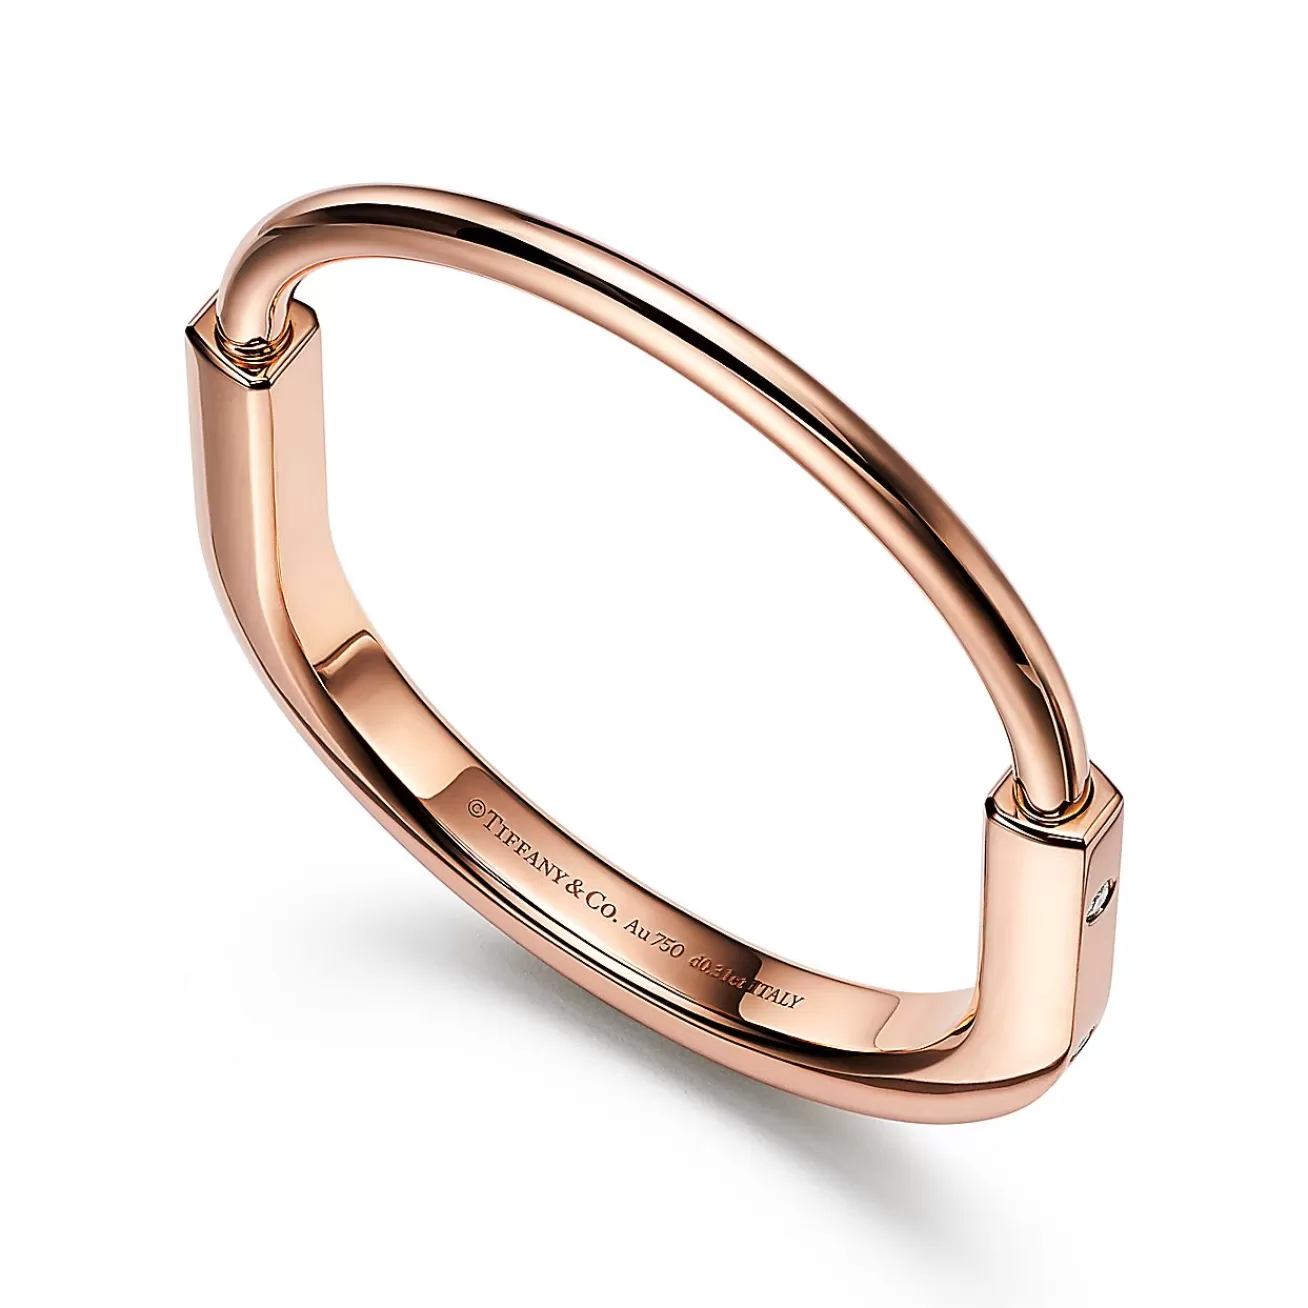 Tiffany & Co. Tiffany Lock Bangle in Rose Gold with Diamond Accents | ^ Bracelets | Men's Jewelry